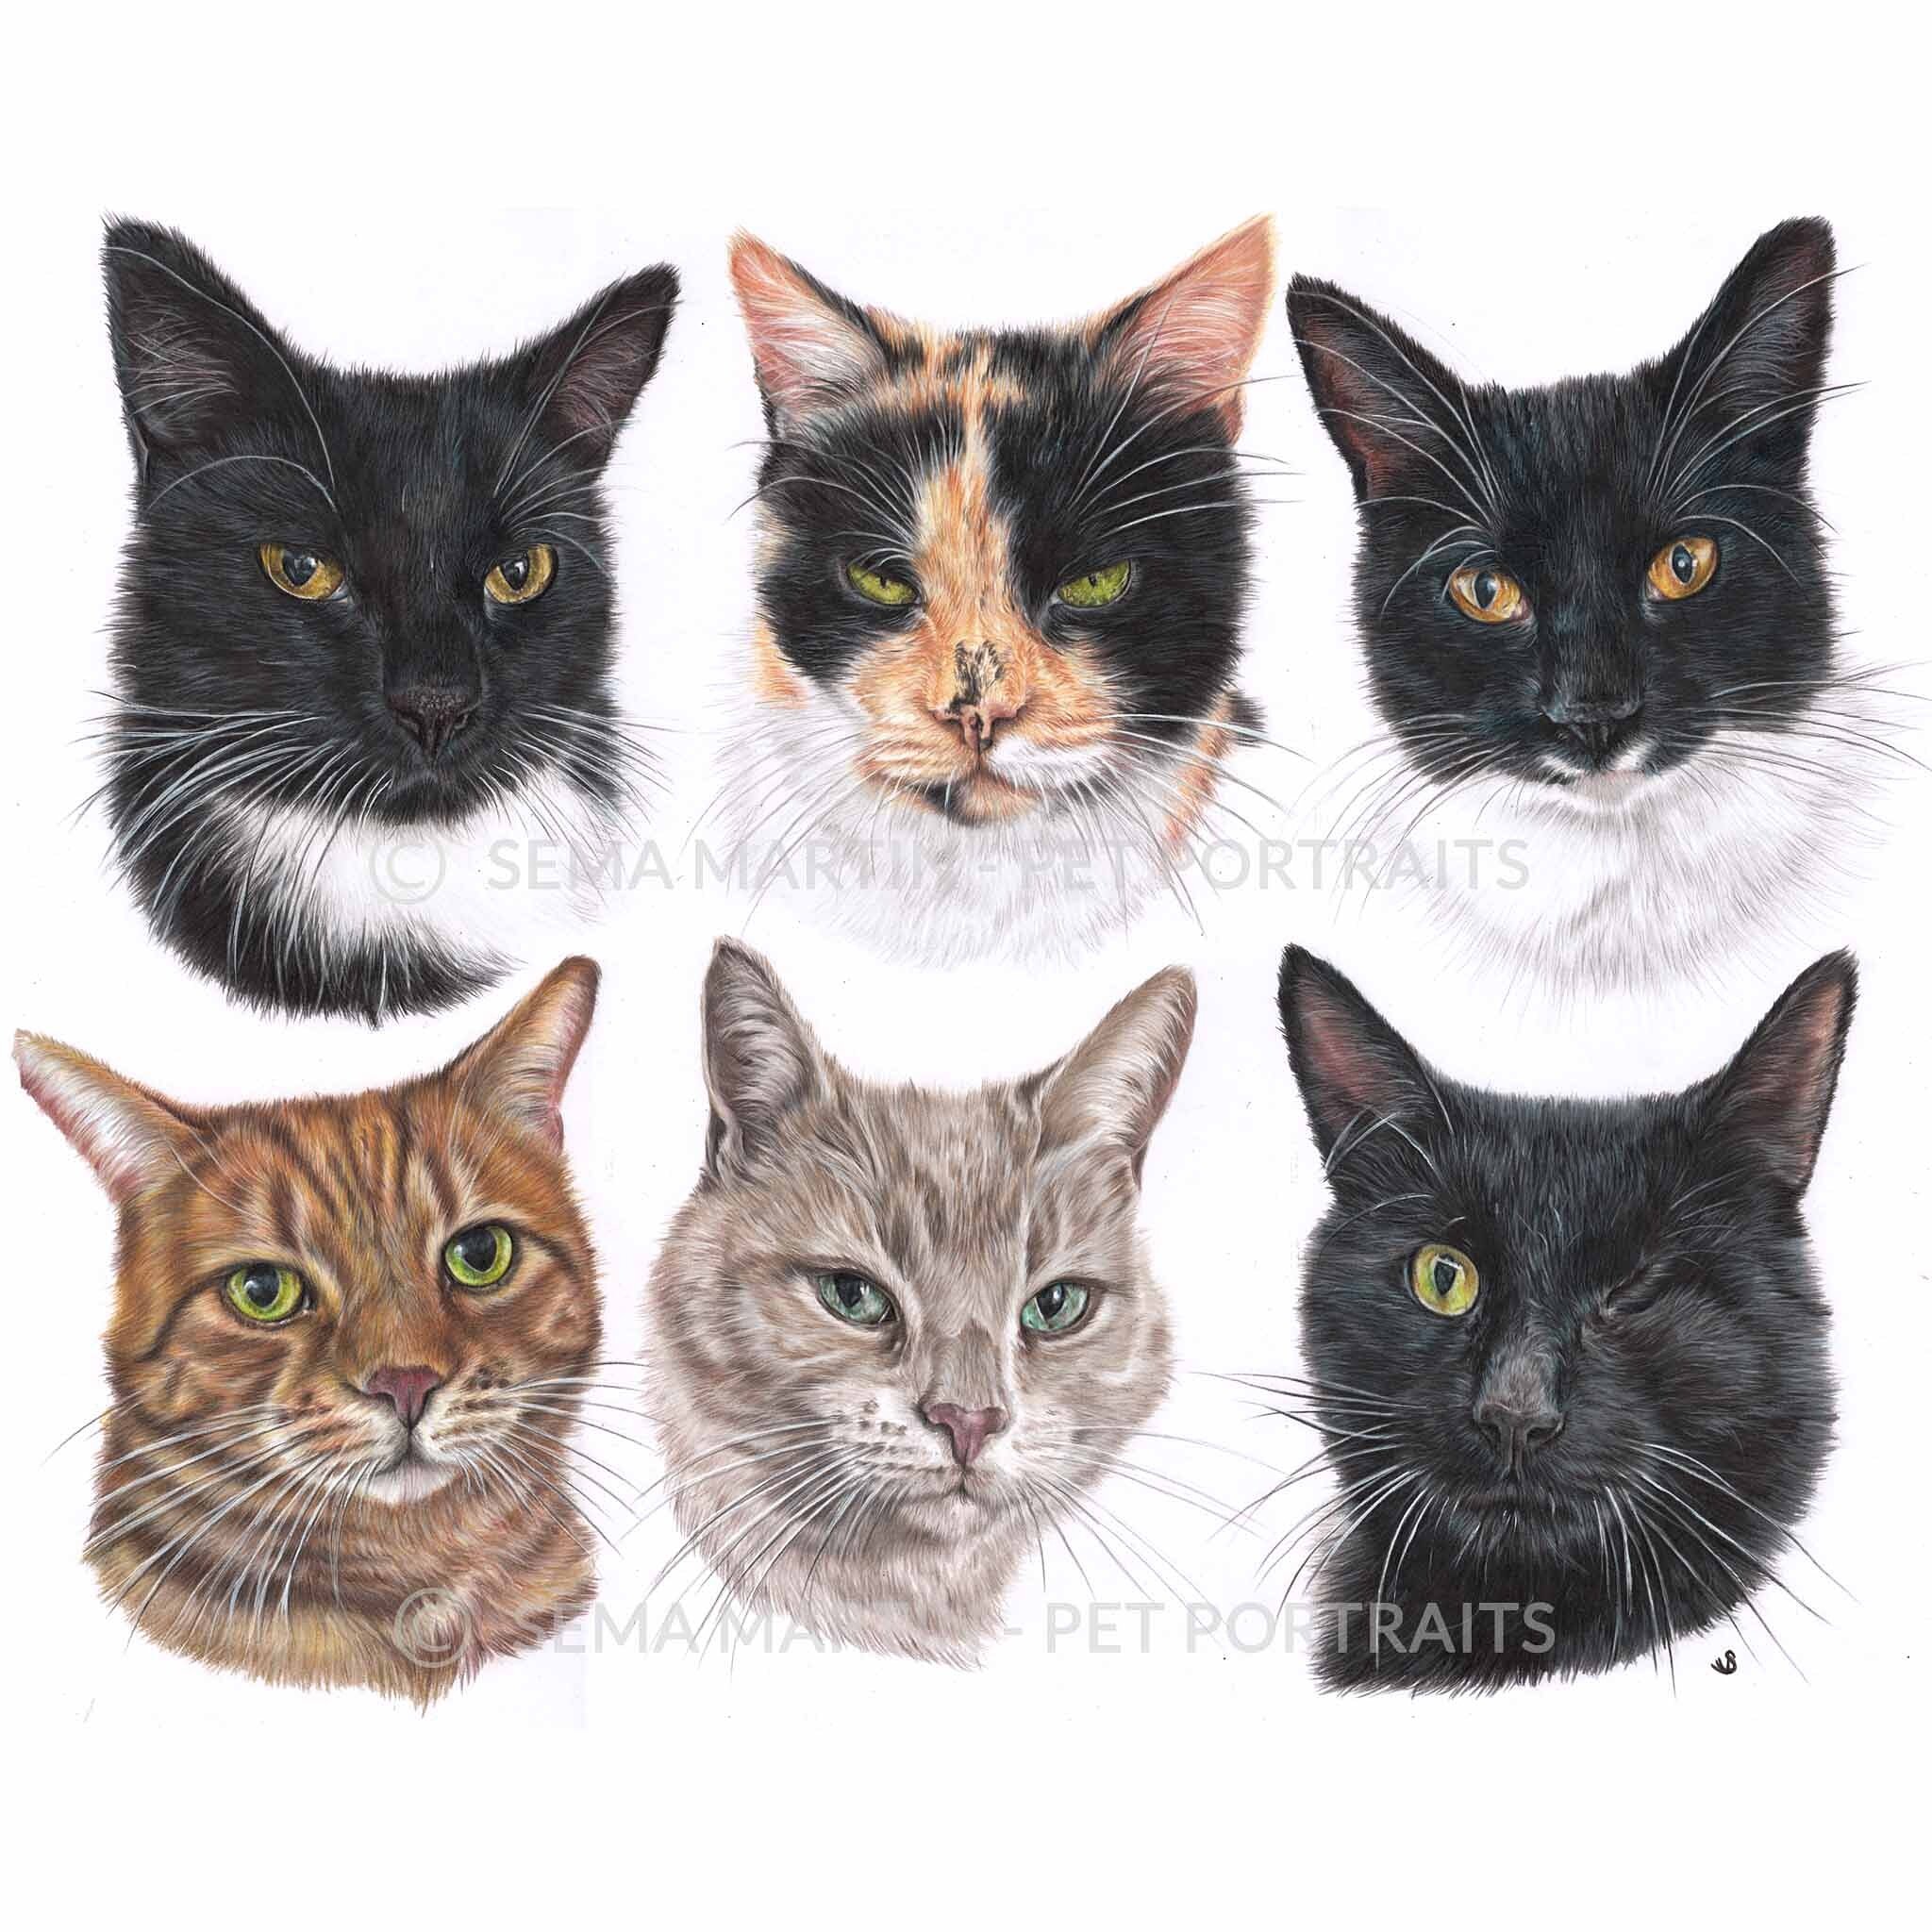 drawing of a black cat with one eye and six other cats by Sema Martin